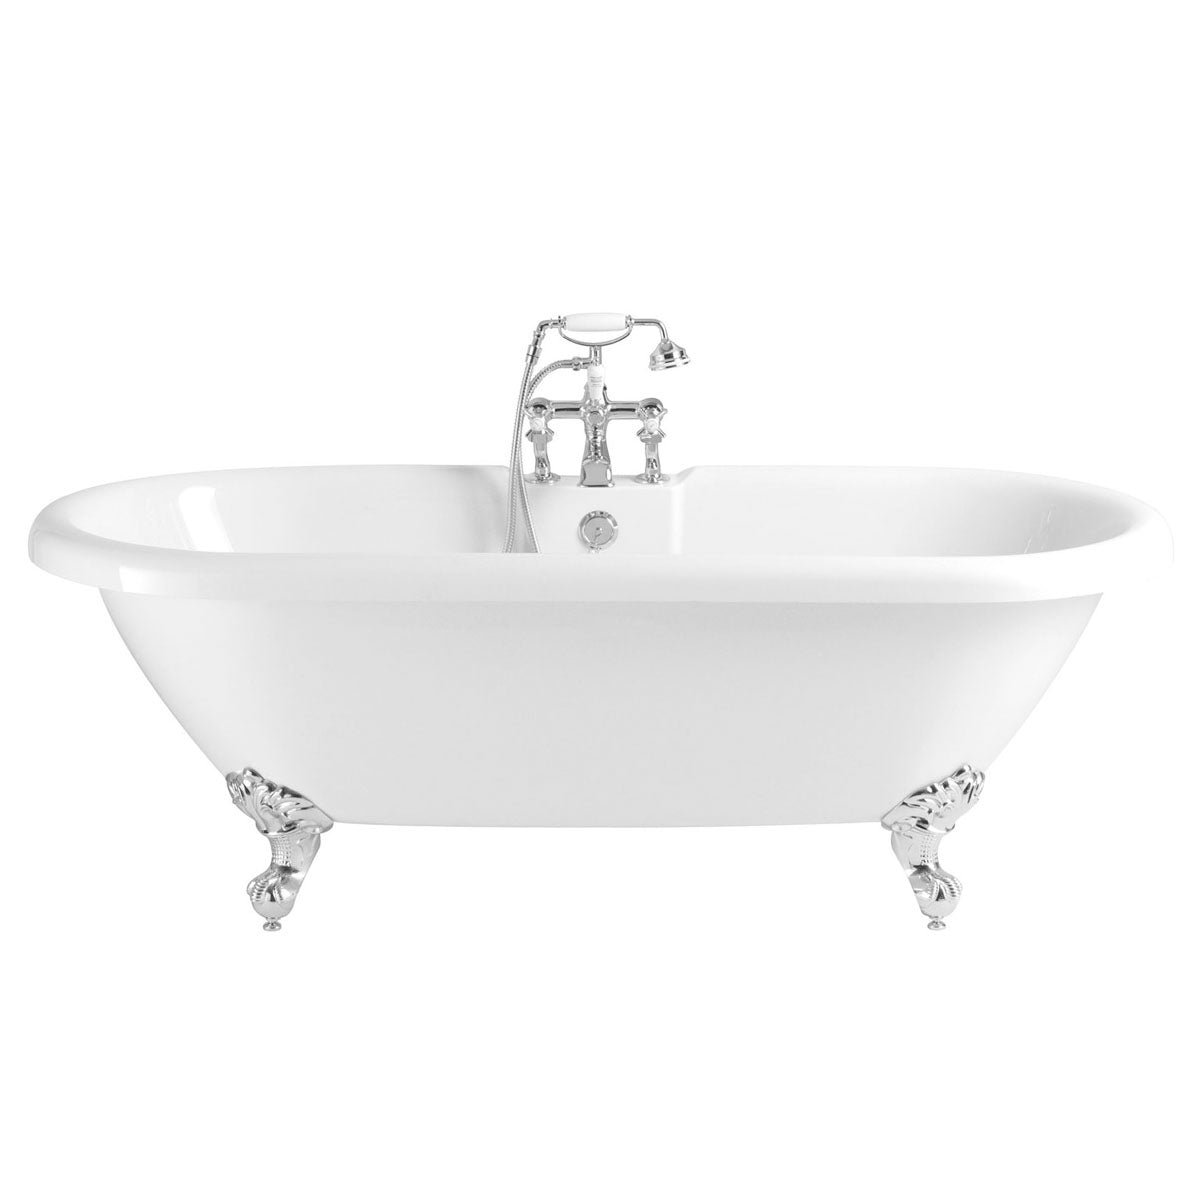 Heritage Oban Double Ended Roll Top Freestanding Bath Acrylic 1495x795mm